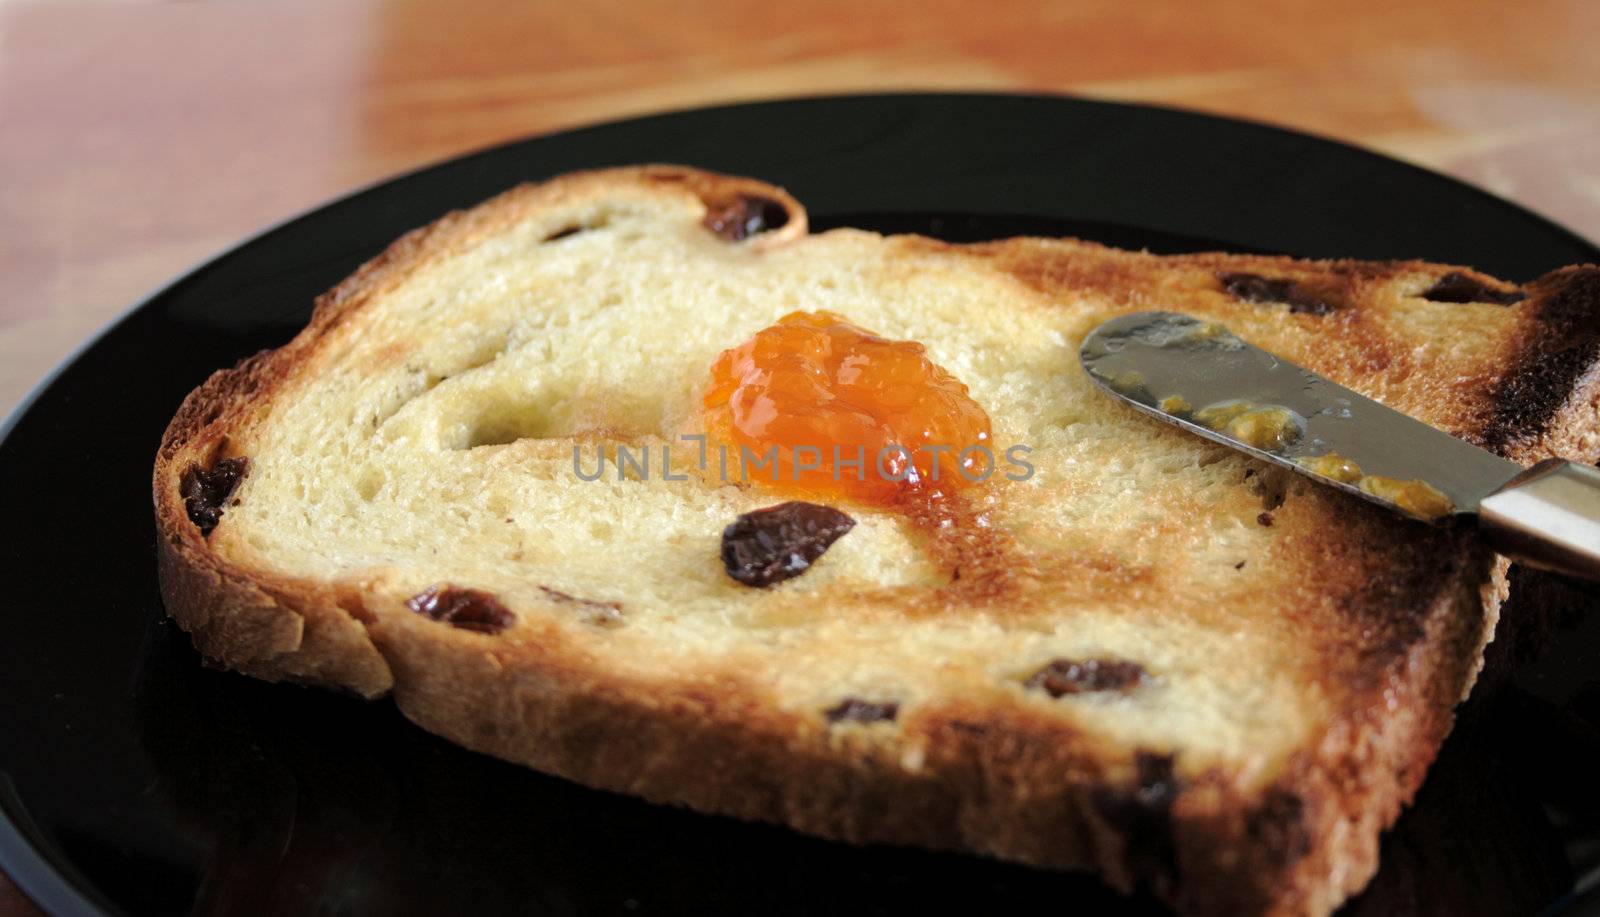 raisin toast with a dollop of apricot jam on a black plate against a weathered tabletop background